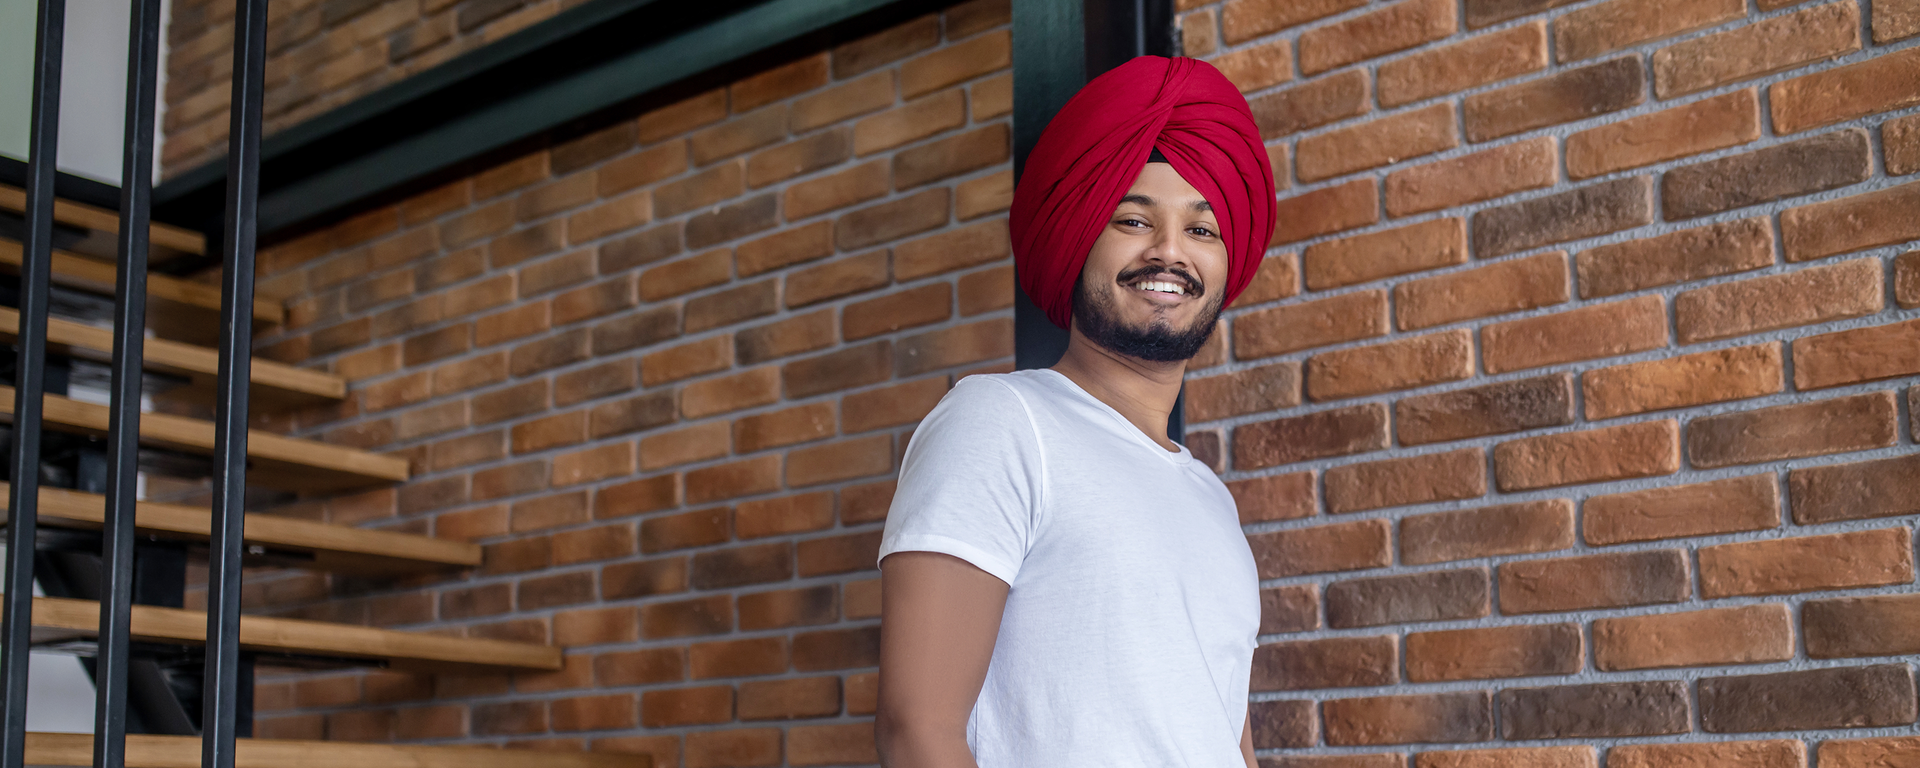 A young Sikh man walks down stairs carrying a laptop. He wears a turban and he is looking towards the camera and smiling.